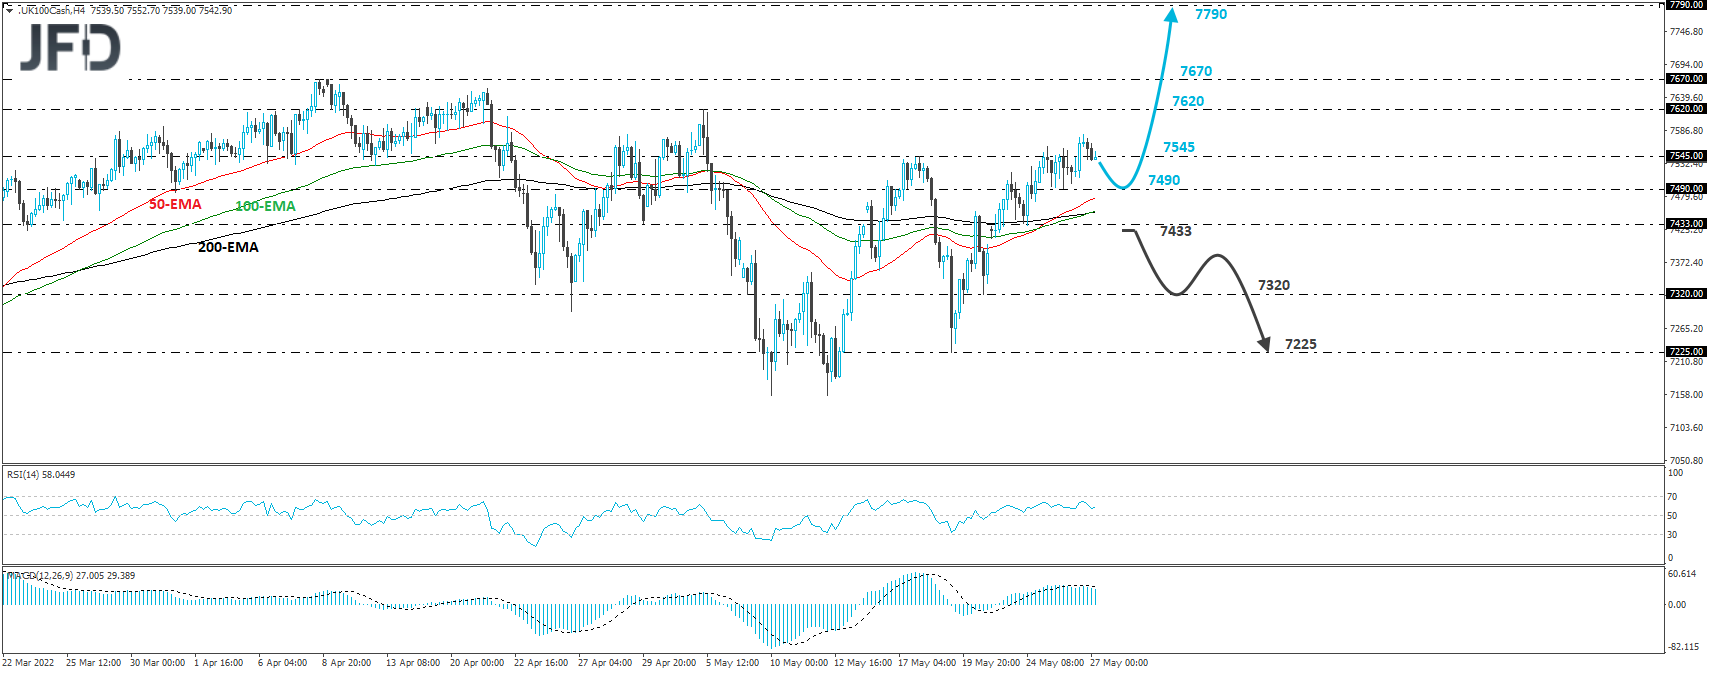 FTSE 100 cash index 4-hour chart technical analysis.